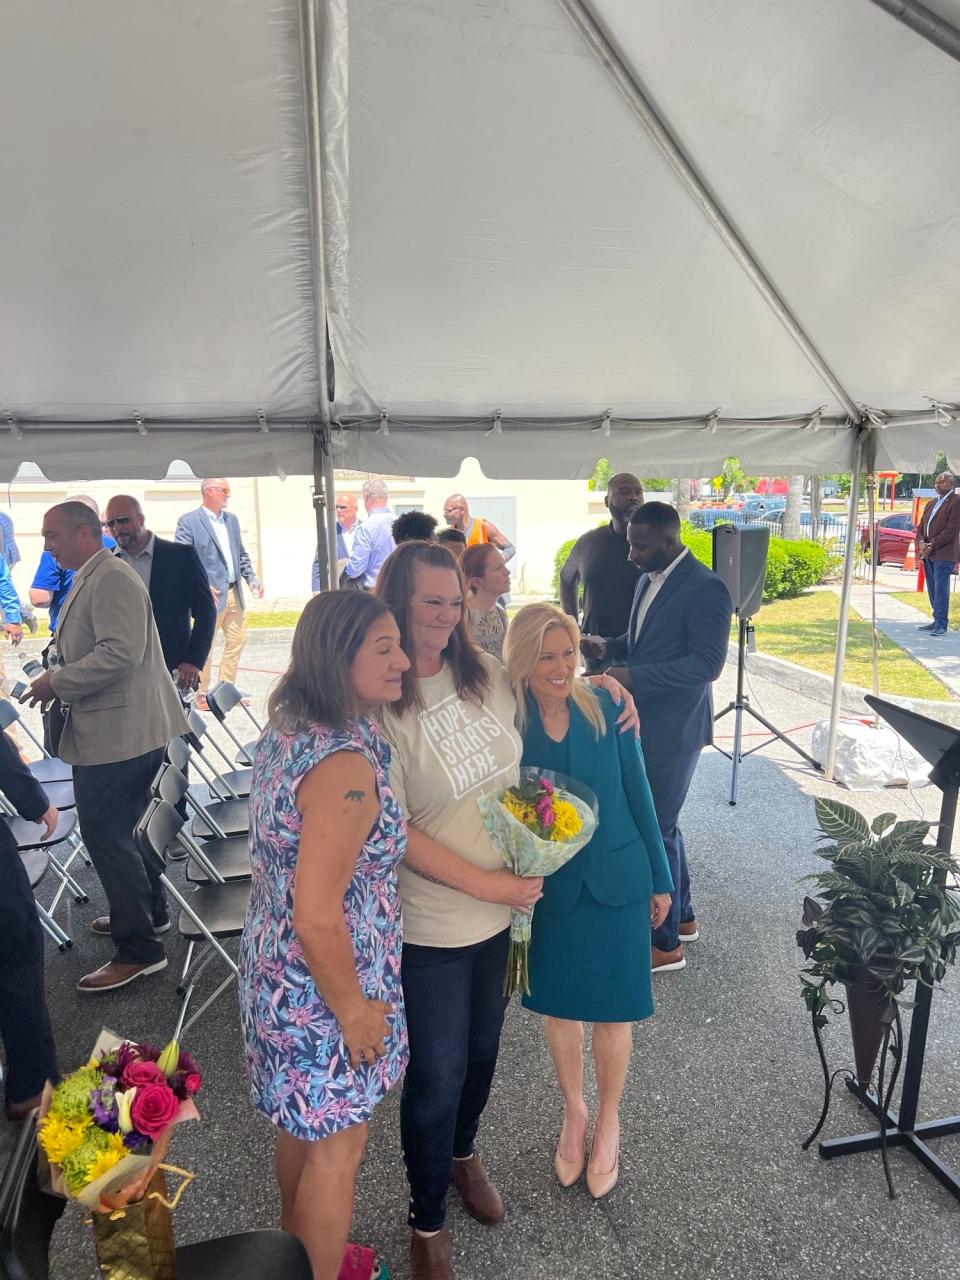 Ready2Work graduate Leigh Ann Bohrer, center, gets congratulatory hugs from Mayor Donna Deegan, right, and an unidentified woman at a recent graduation ceremony for the Operation New Hope program for ex-offenders.